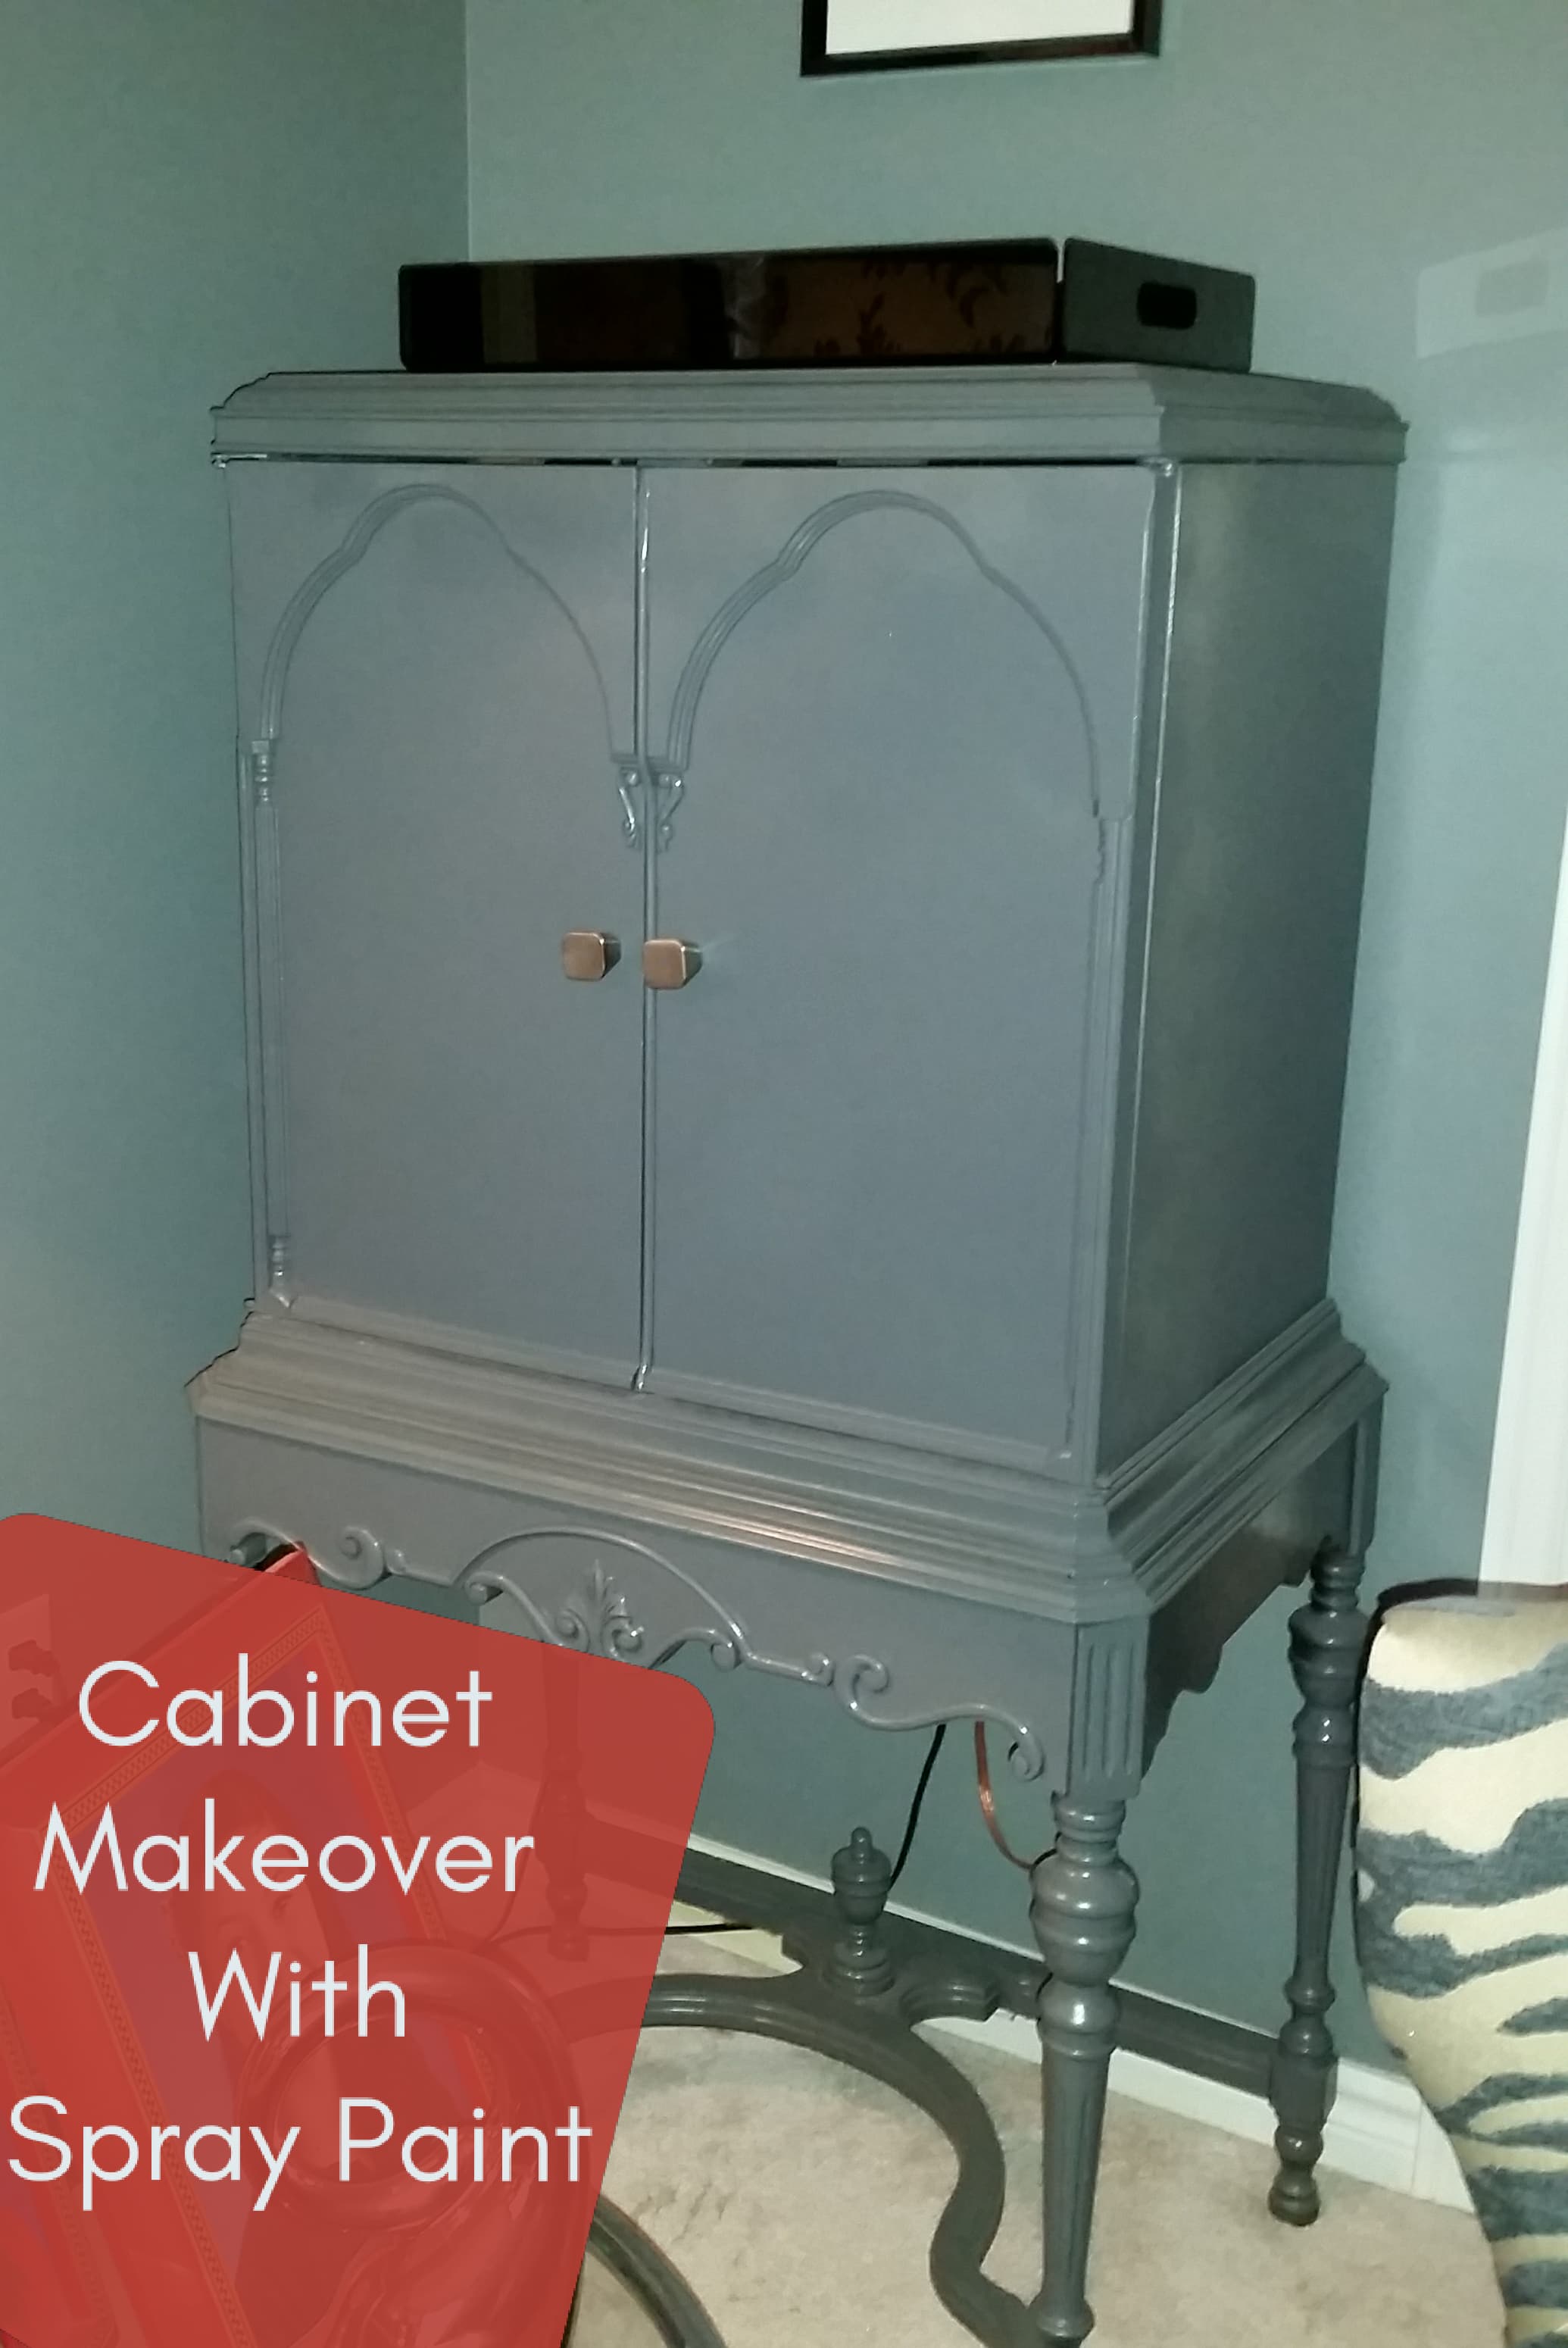 Cabinet Makeover with Spray Paint @DownshiftingPRO